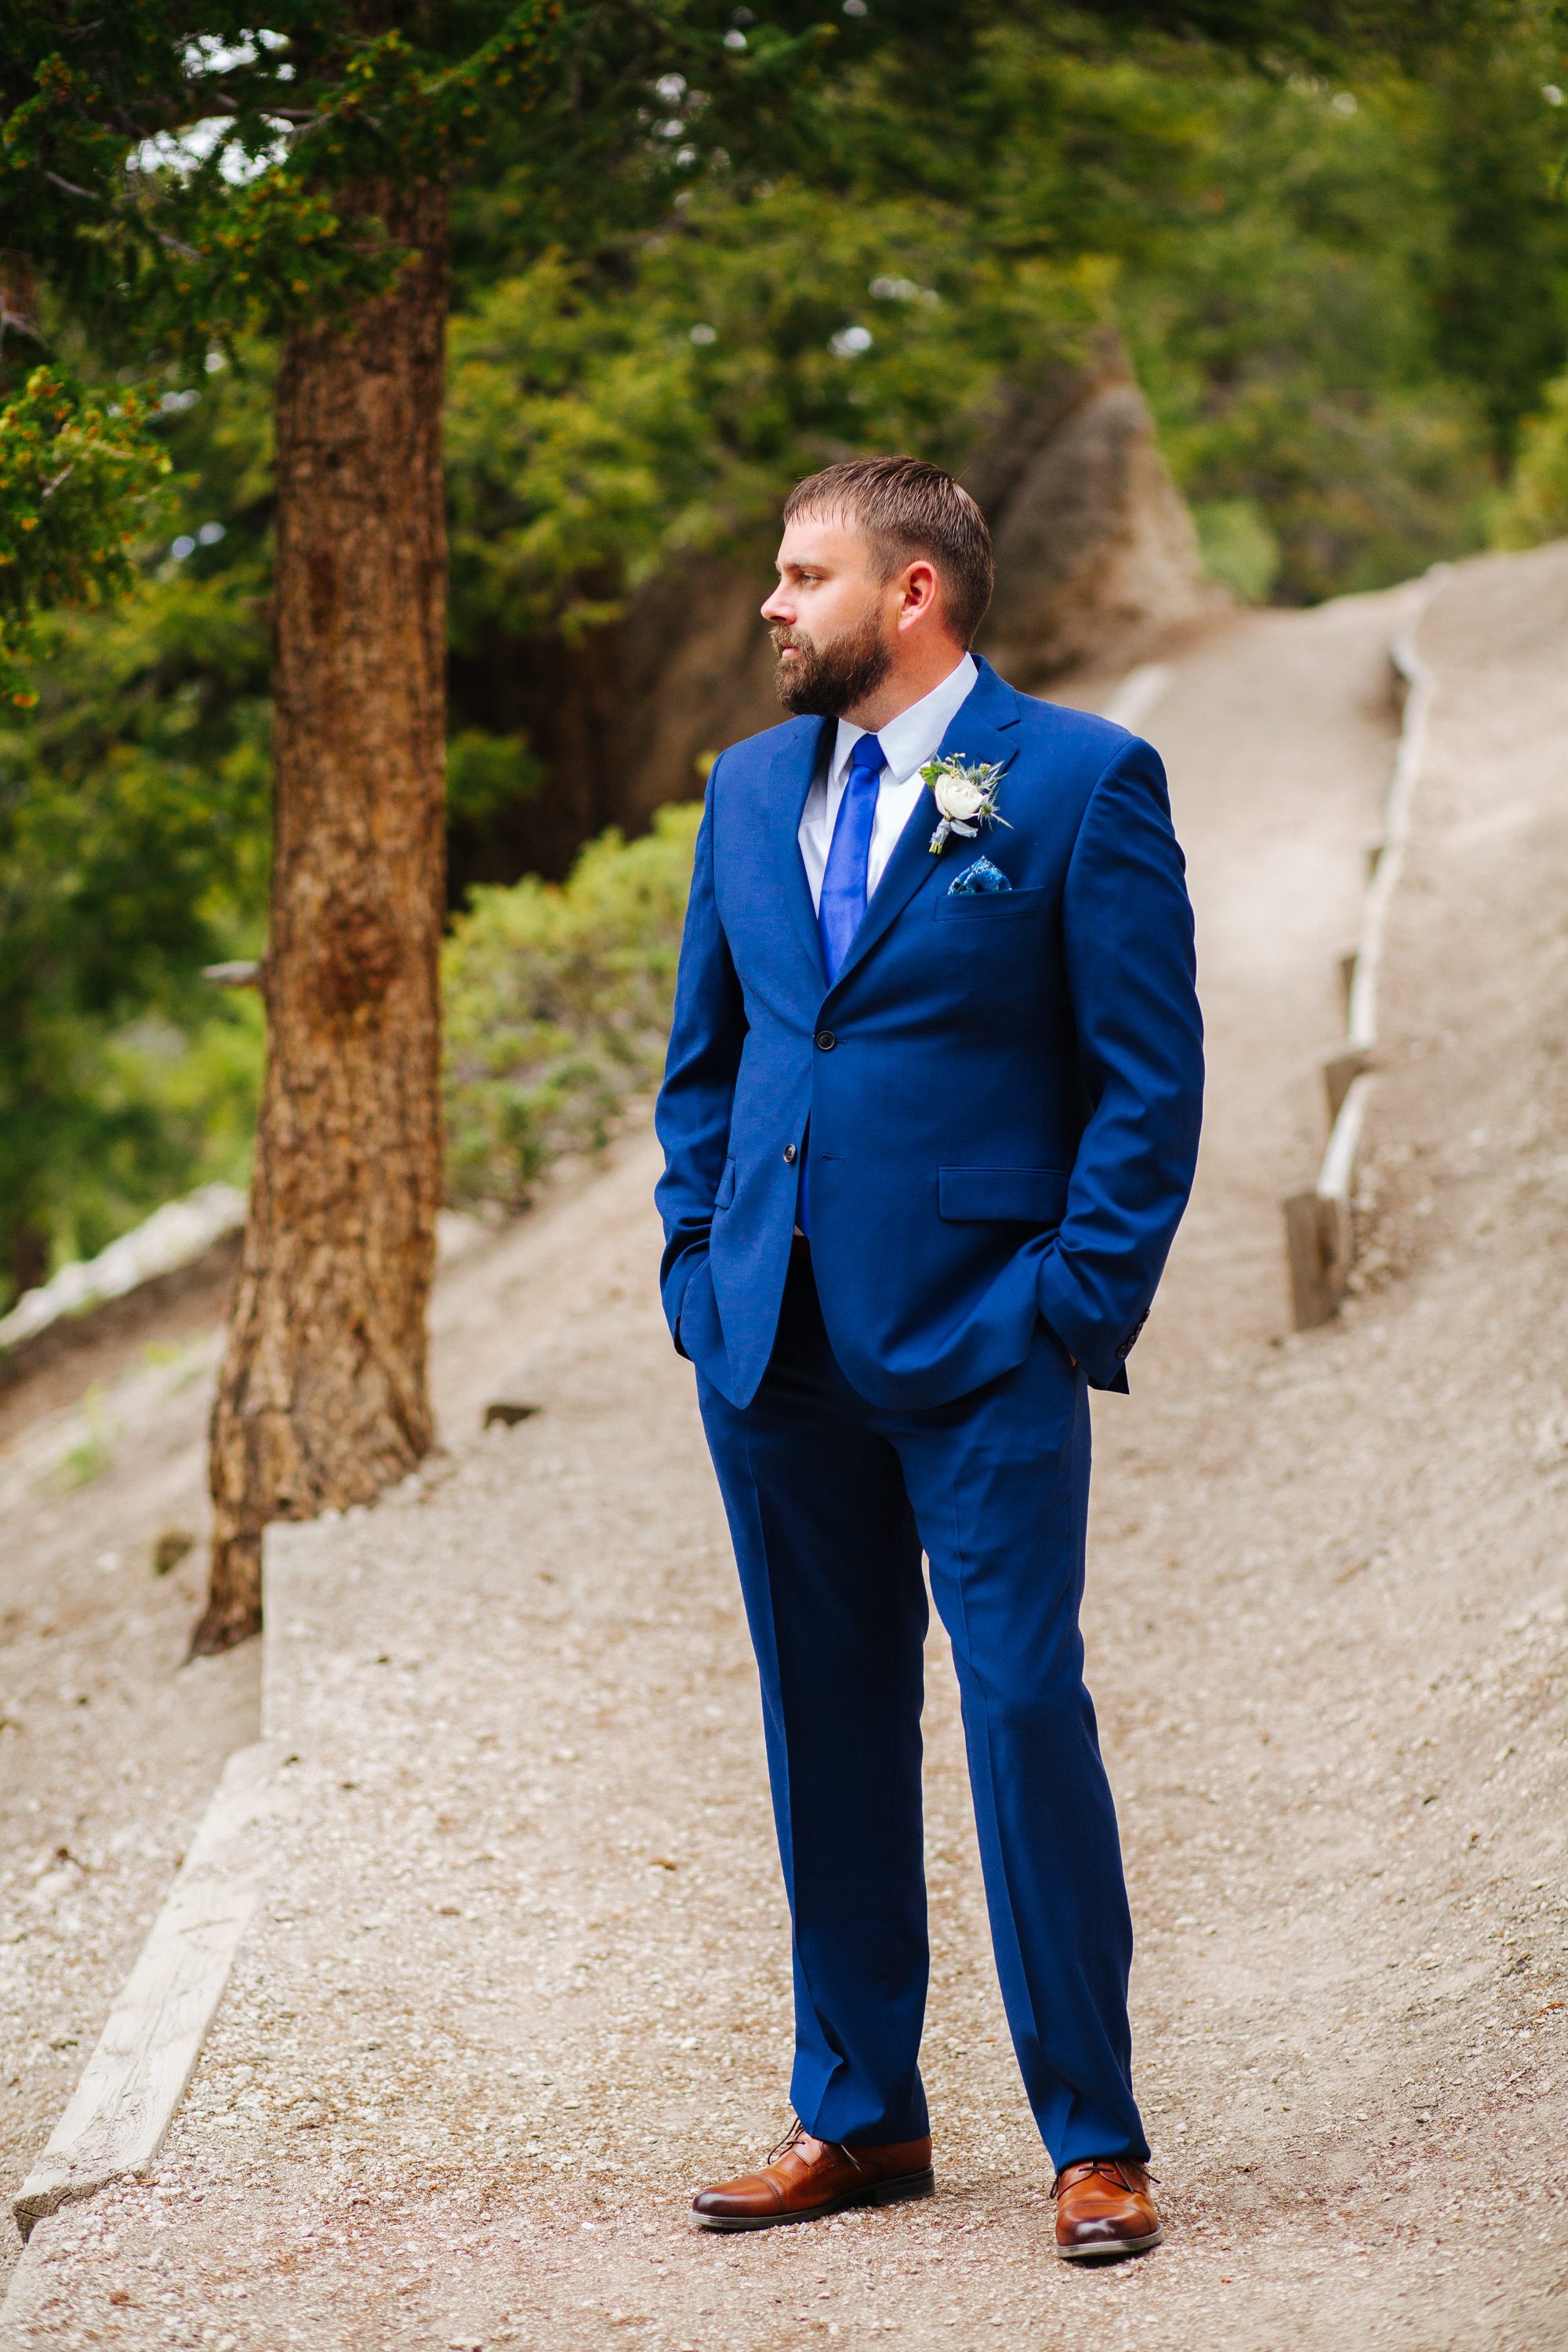 sapphire point, sapphire point wedding, blue suit groom, blue pocket square, colorful wedding photographer, colorful colorado wedding, intimate wedding, intimate wedding photographer, groom details, white groom flowers, groom portraits, blue suits